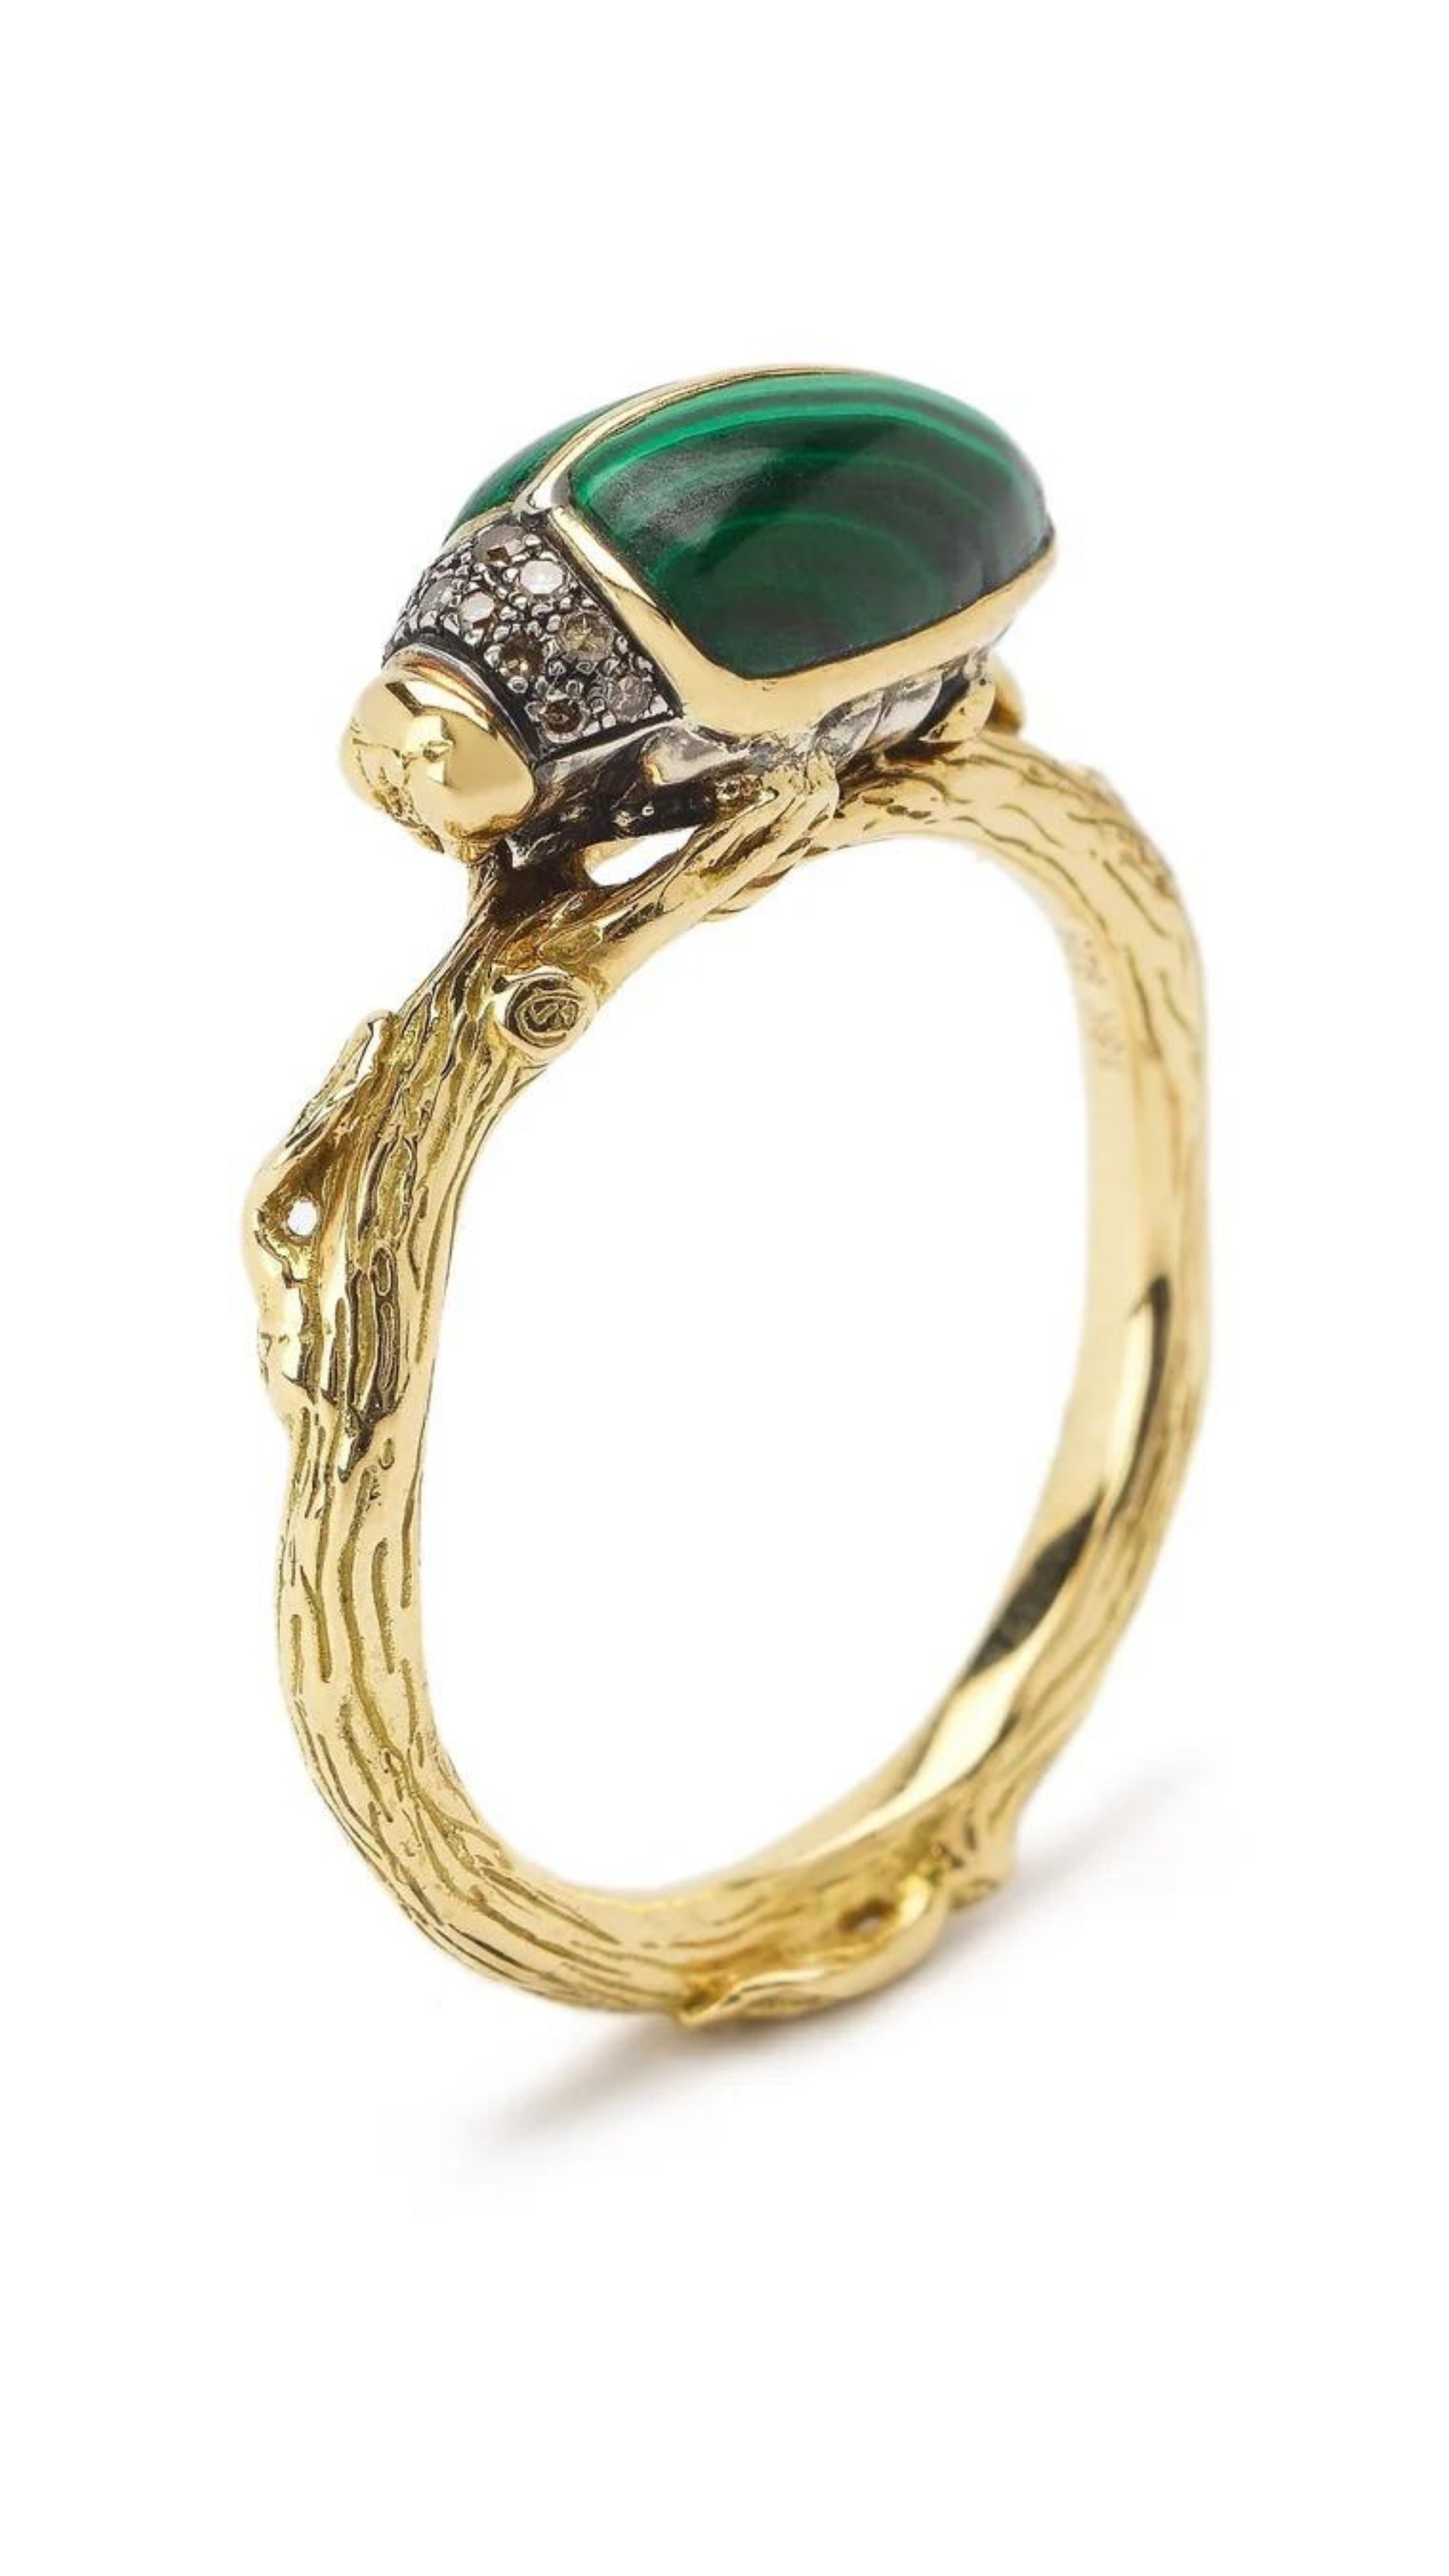 Bibi van der Velden Malachite Scarab Ring Made in 18K yellow gold and sterling silver, this ring textured branch design and a carved Malachite scarab beetle on top. Shown from front and side angle.